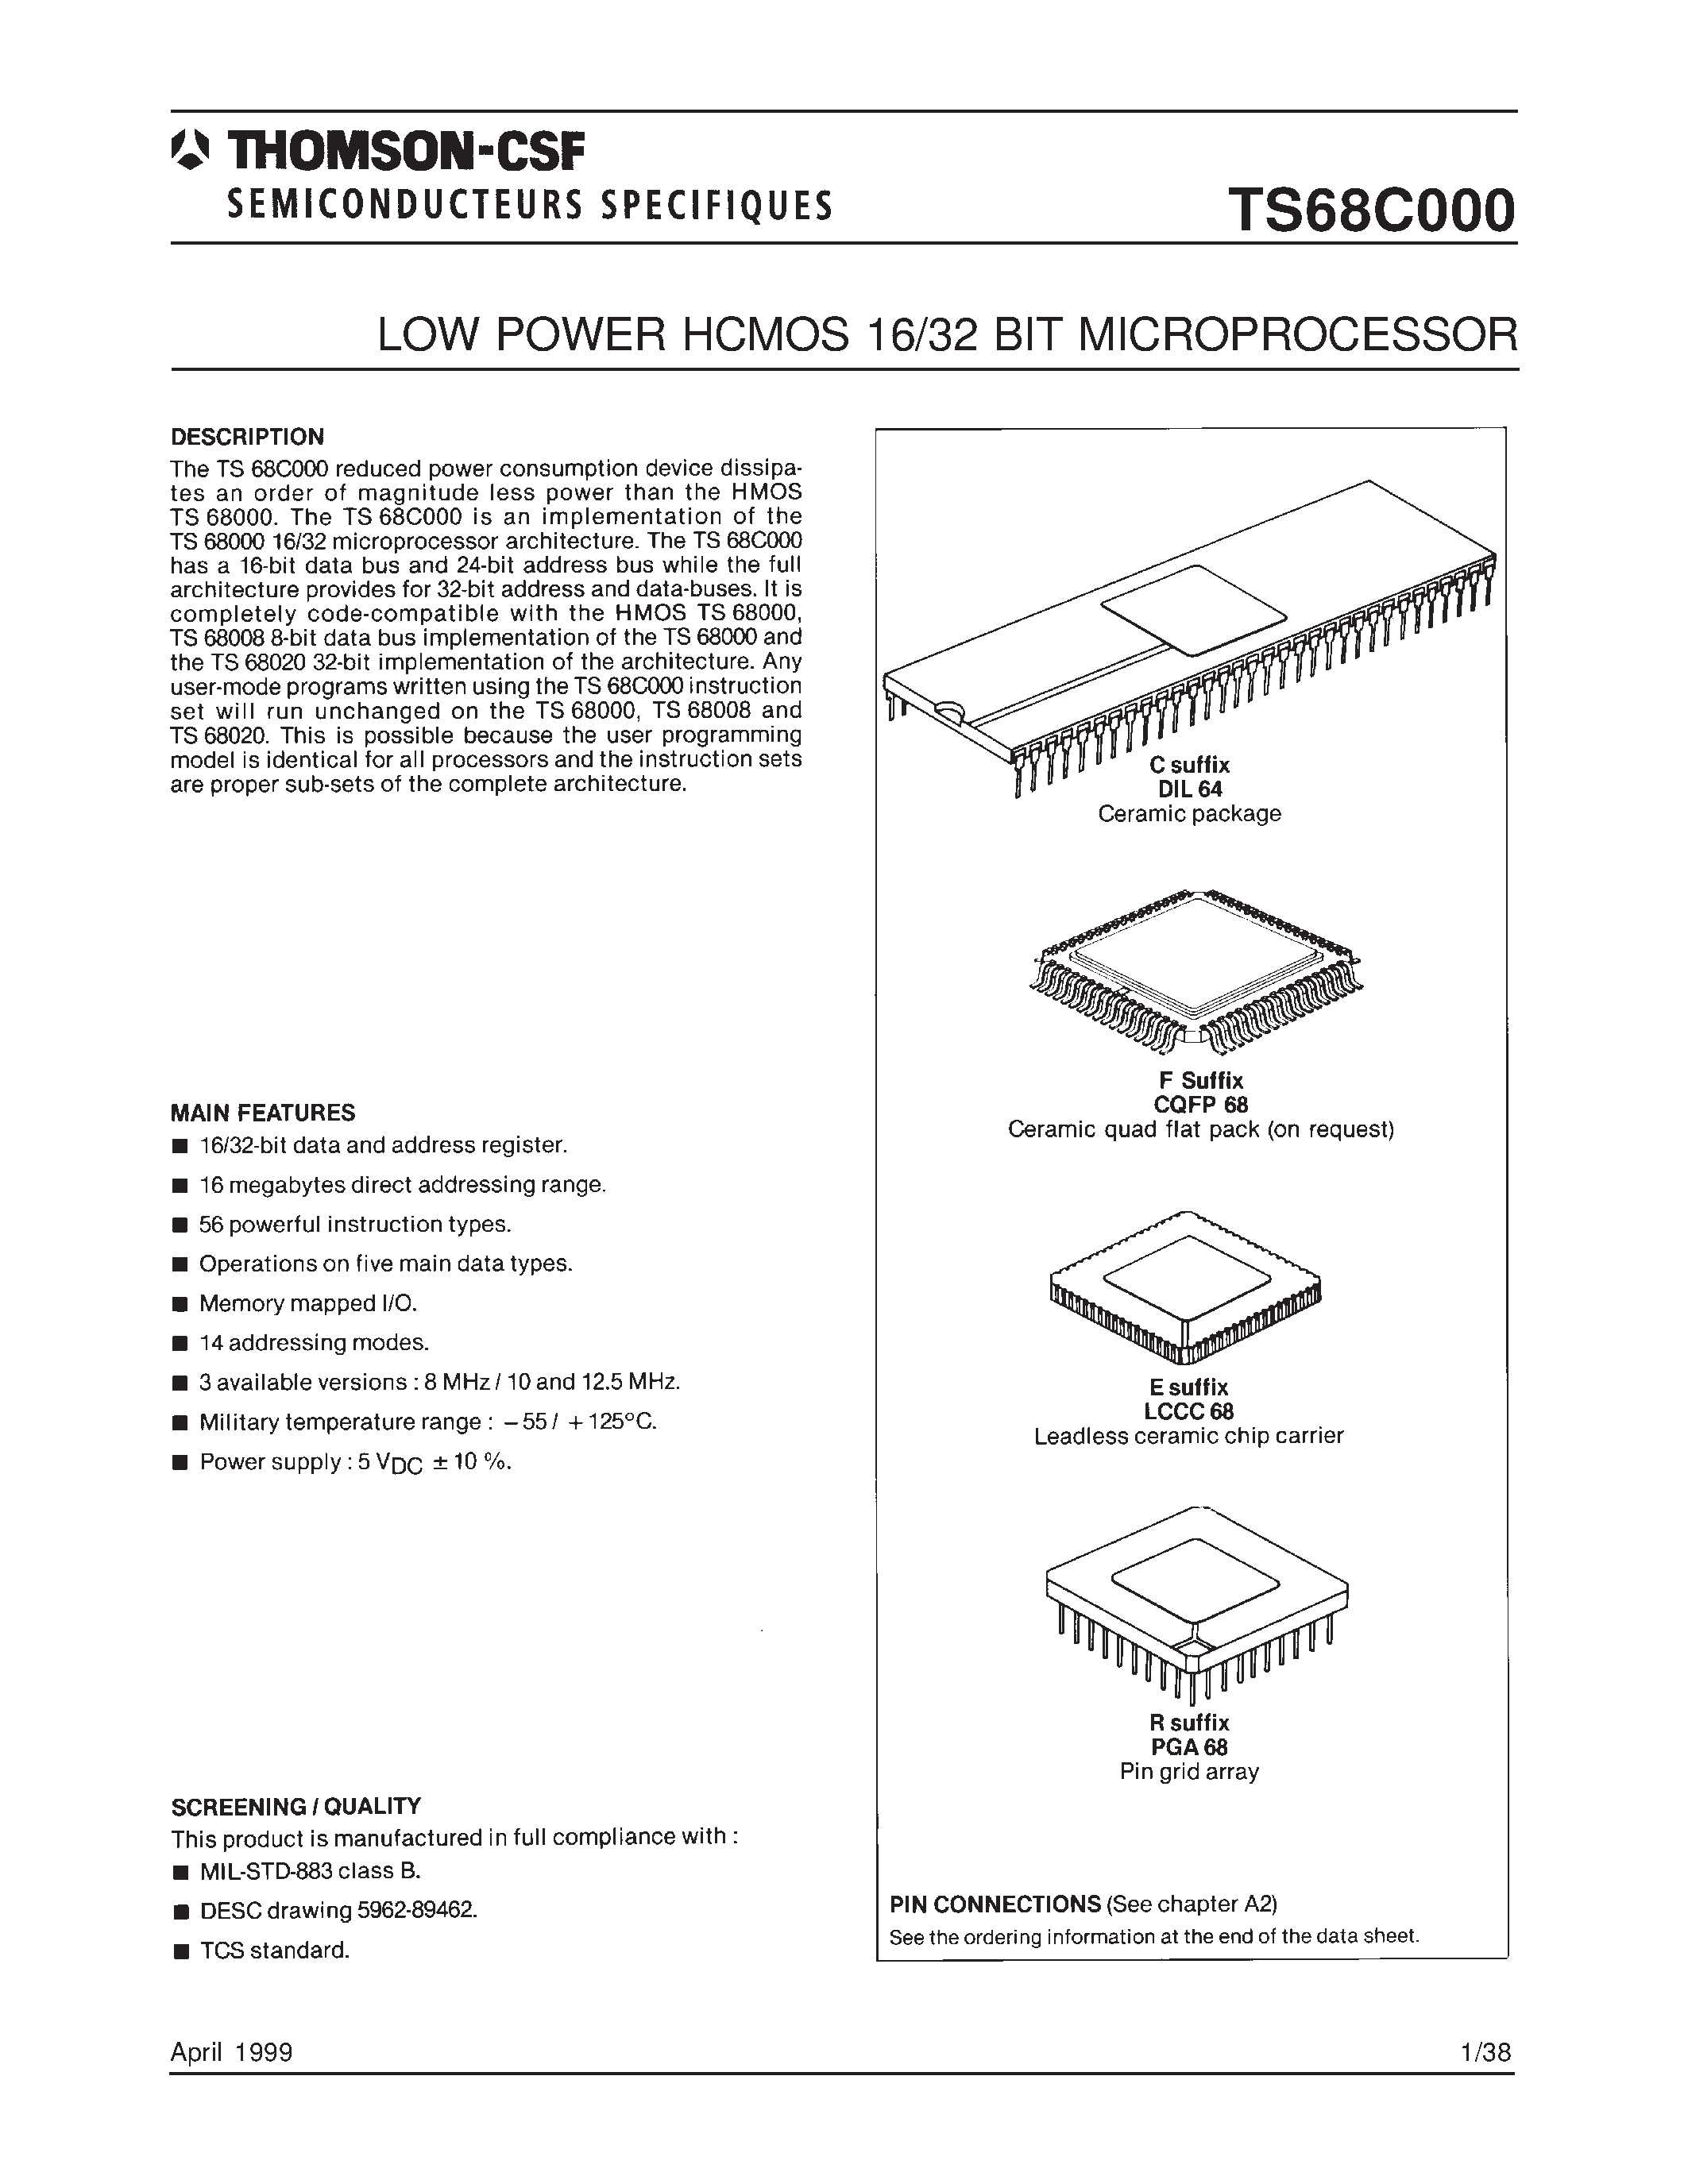 Datasheet TS68C000VE8A - LOW POWER HCMOS 16/32 BIT MICROPROCESSOR page 1